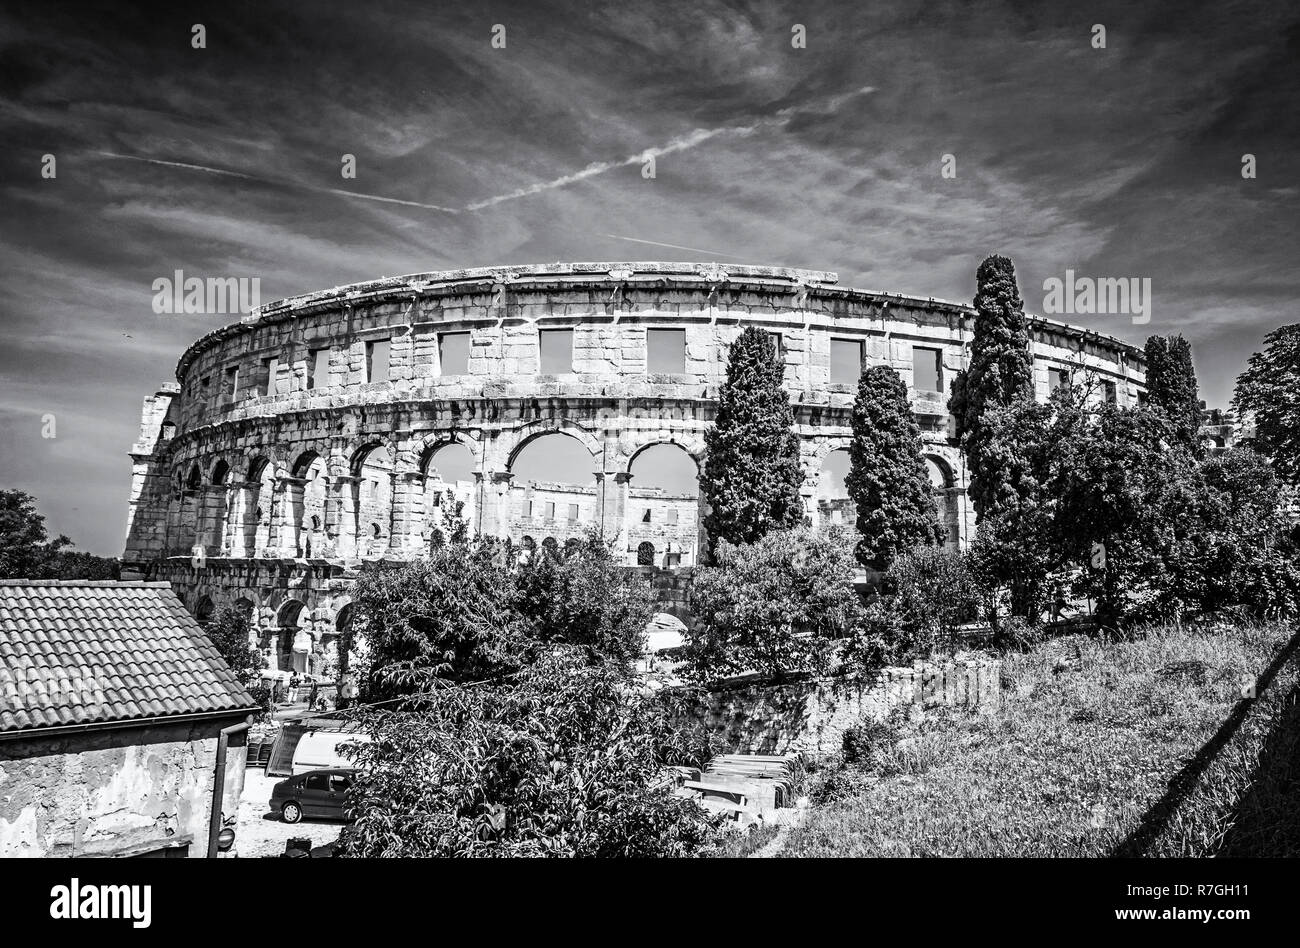 Ancient amphitheater located in Pula, Istria, Croatia. Travel destination. Famous object. Black and white photo. Stock Photo